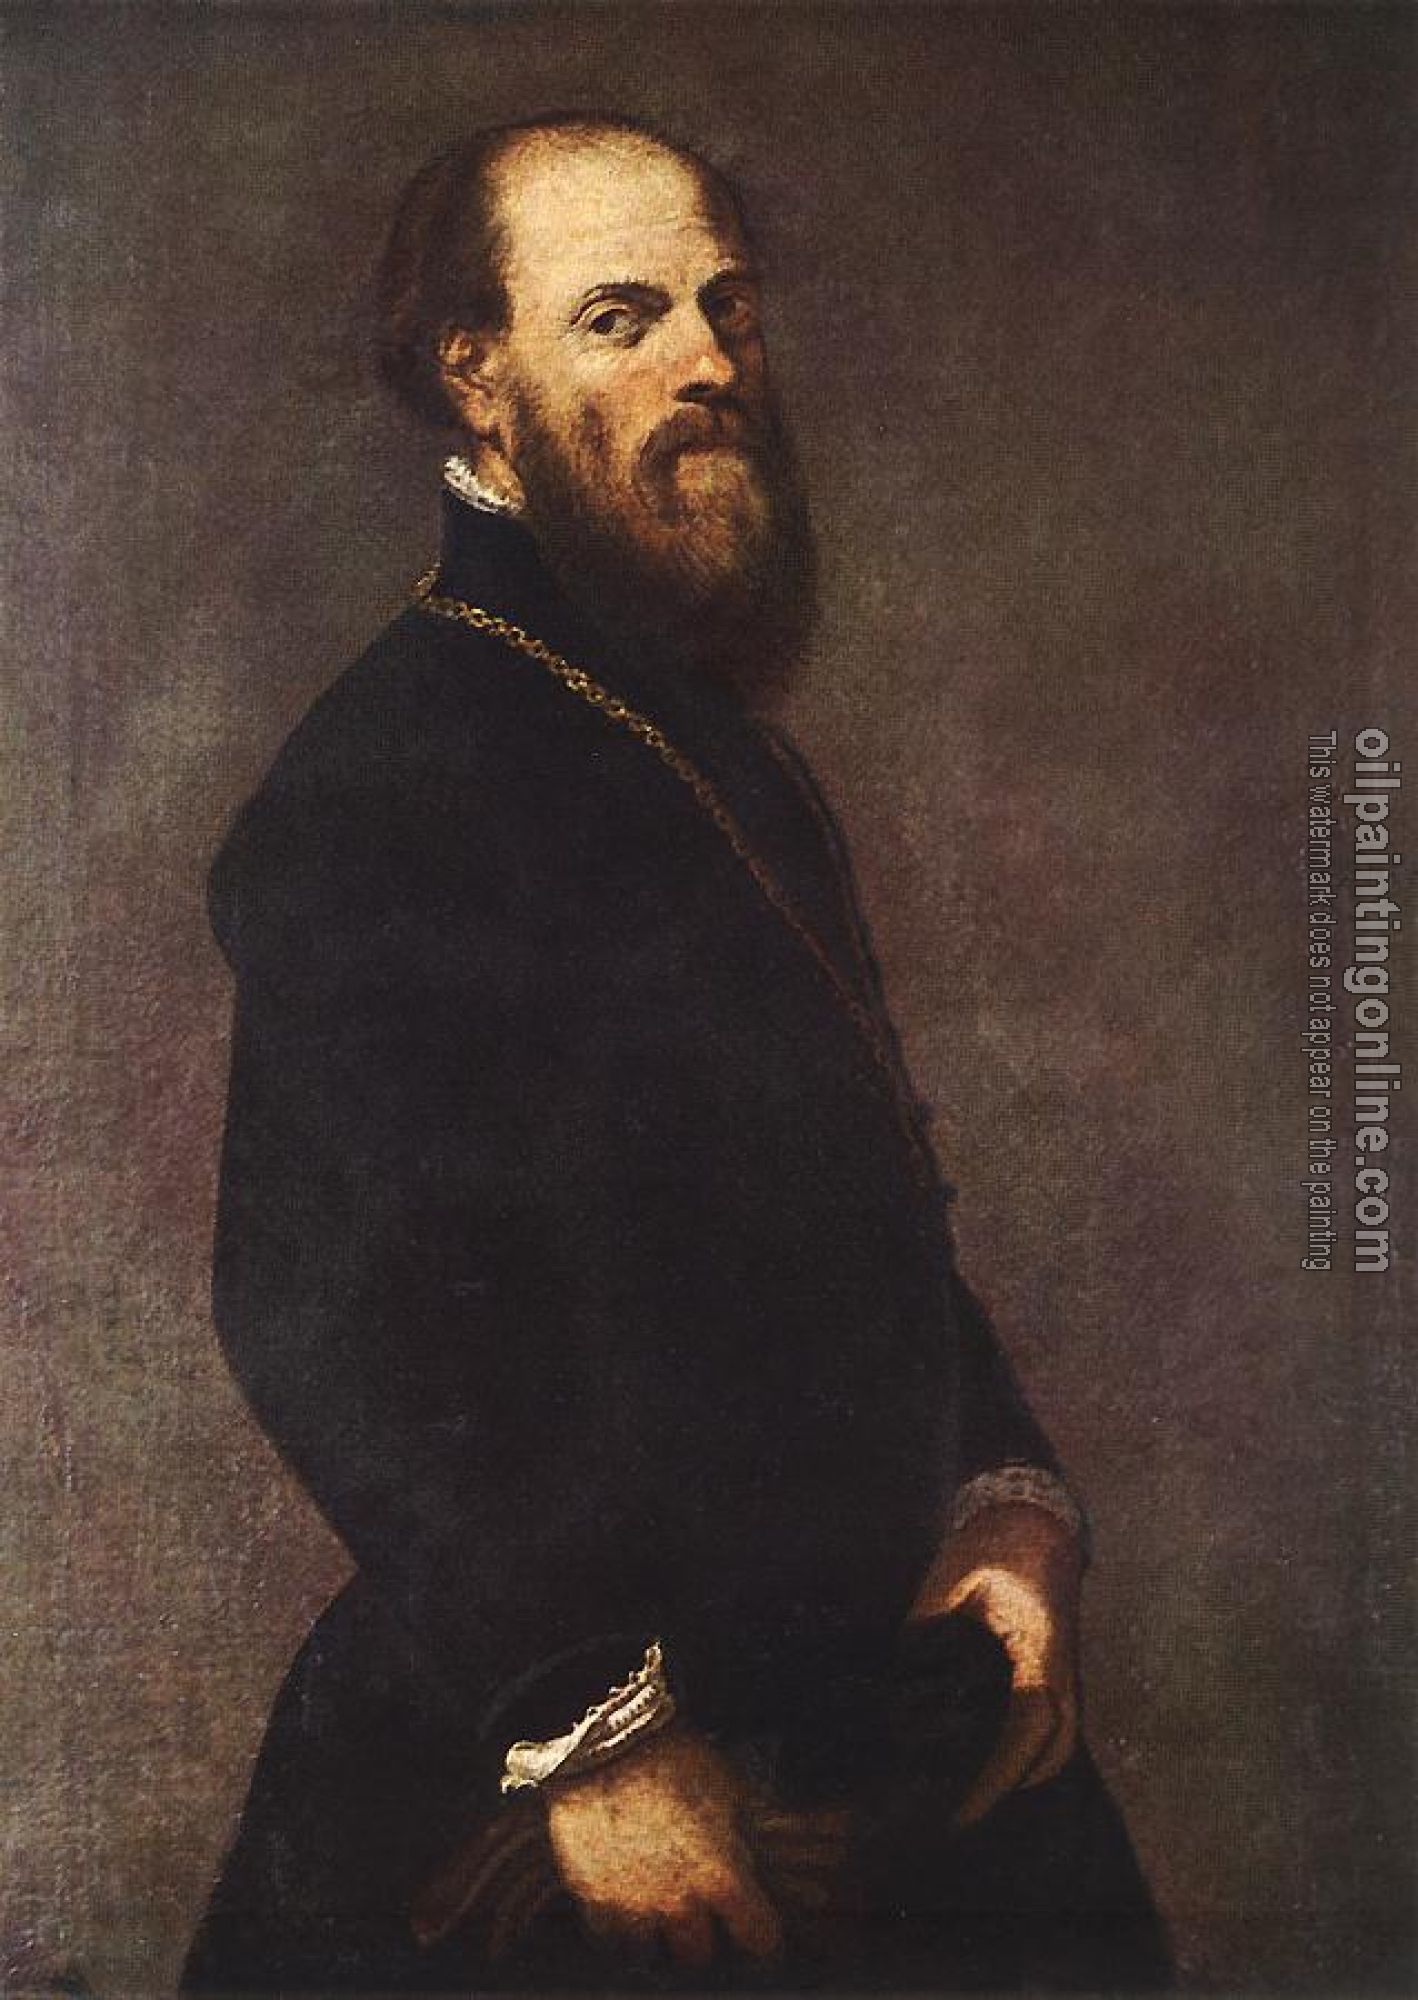 Jacopo Robusti Tintoretto - Man with a Golden Lace